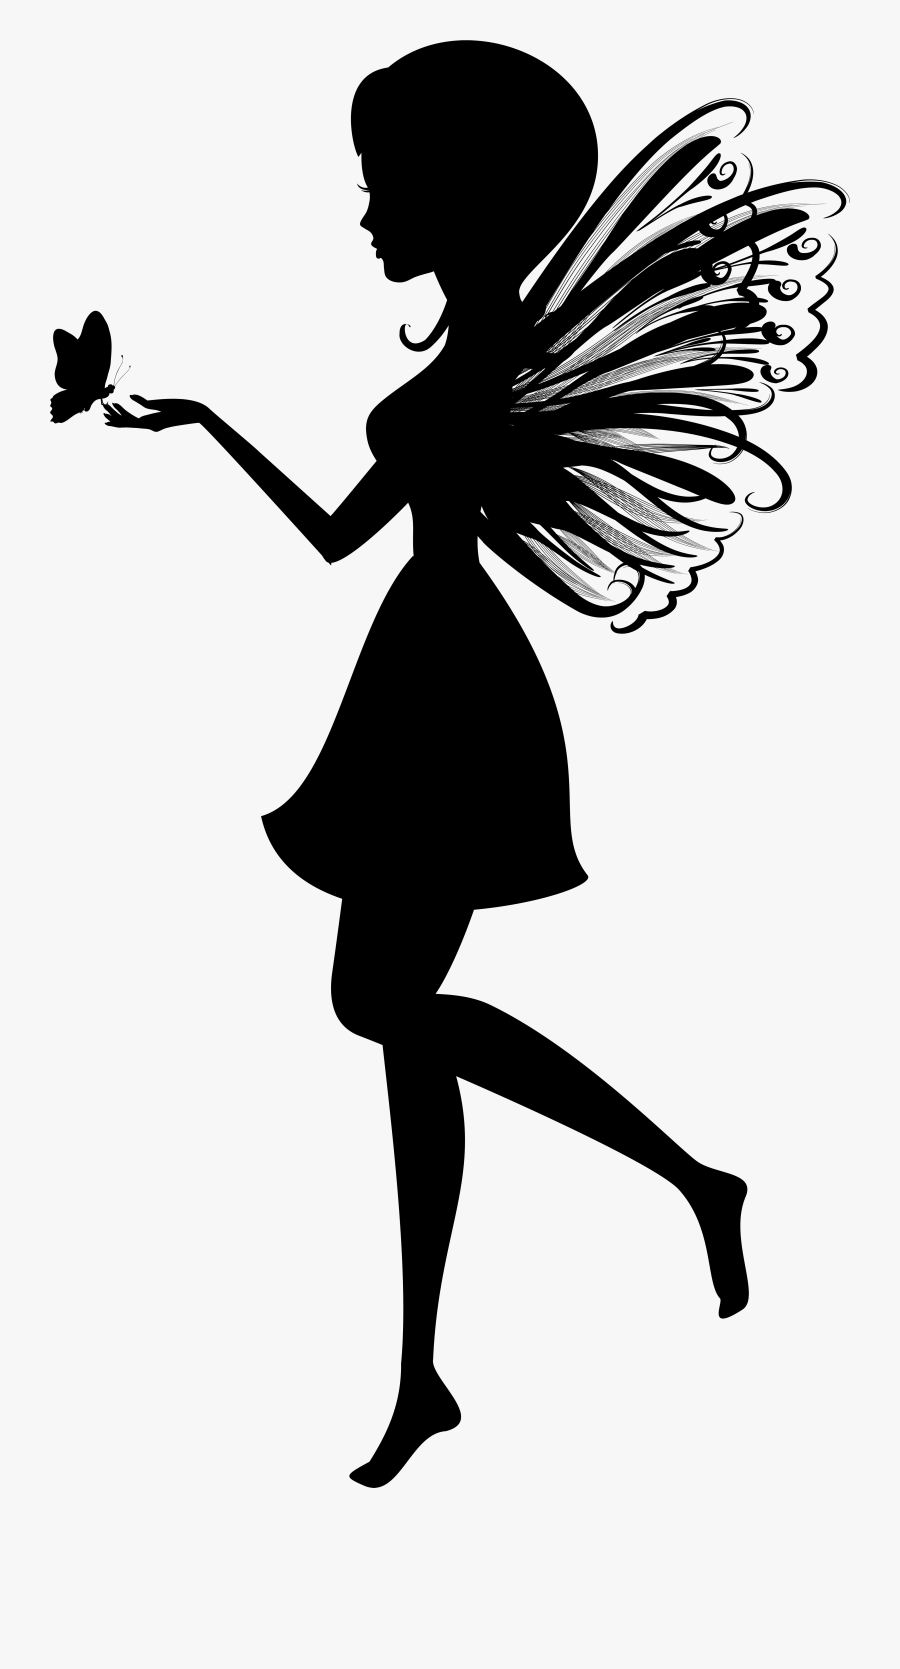 Fairy With Butterfly Silhouette Png Clip Art Image - Free Fairy Silhouette Png, Transparent Clipart